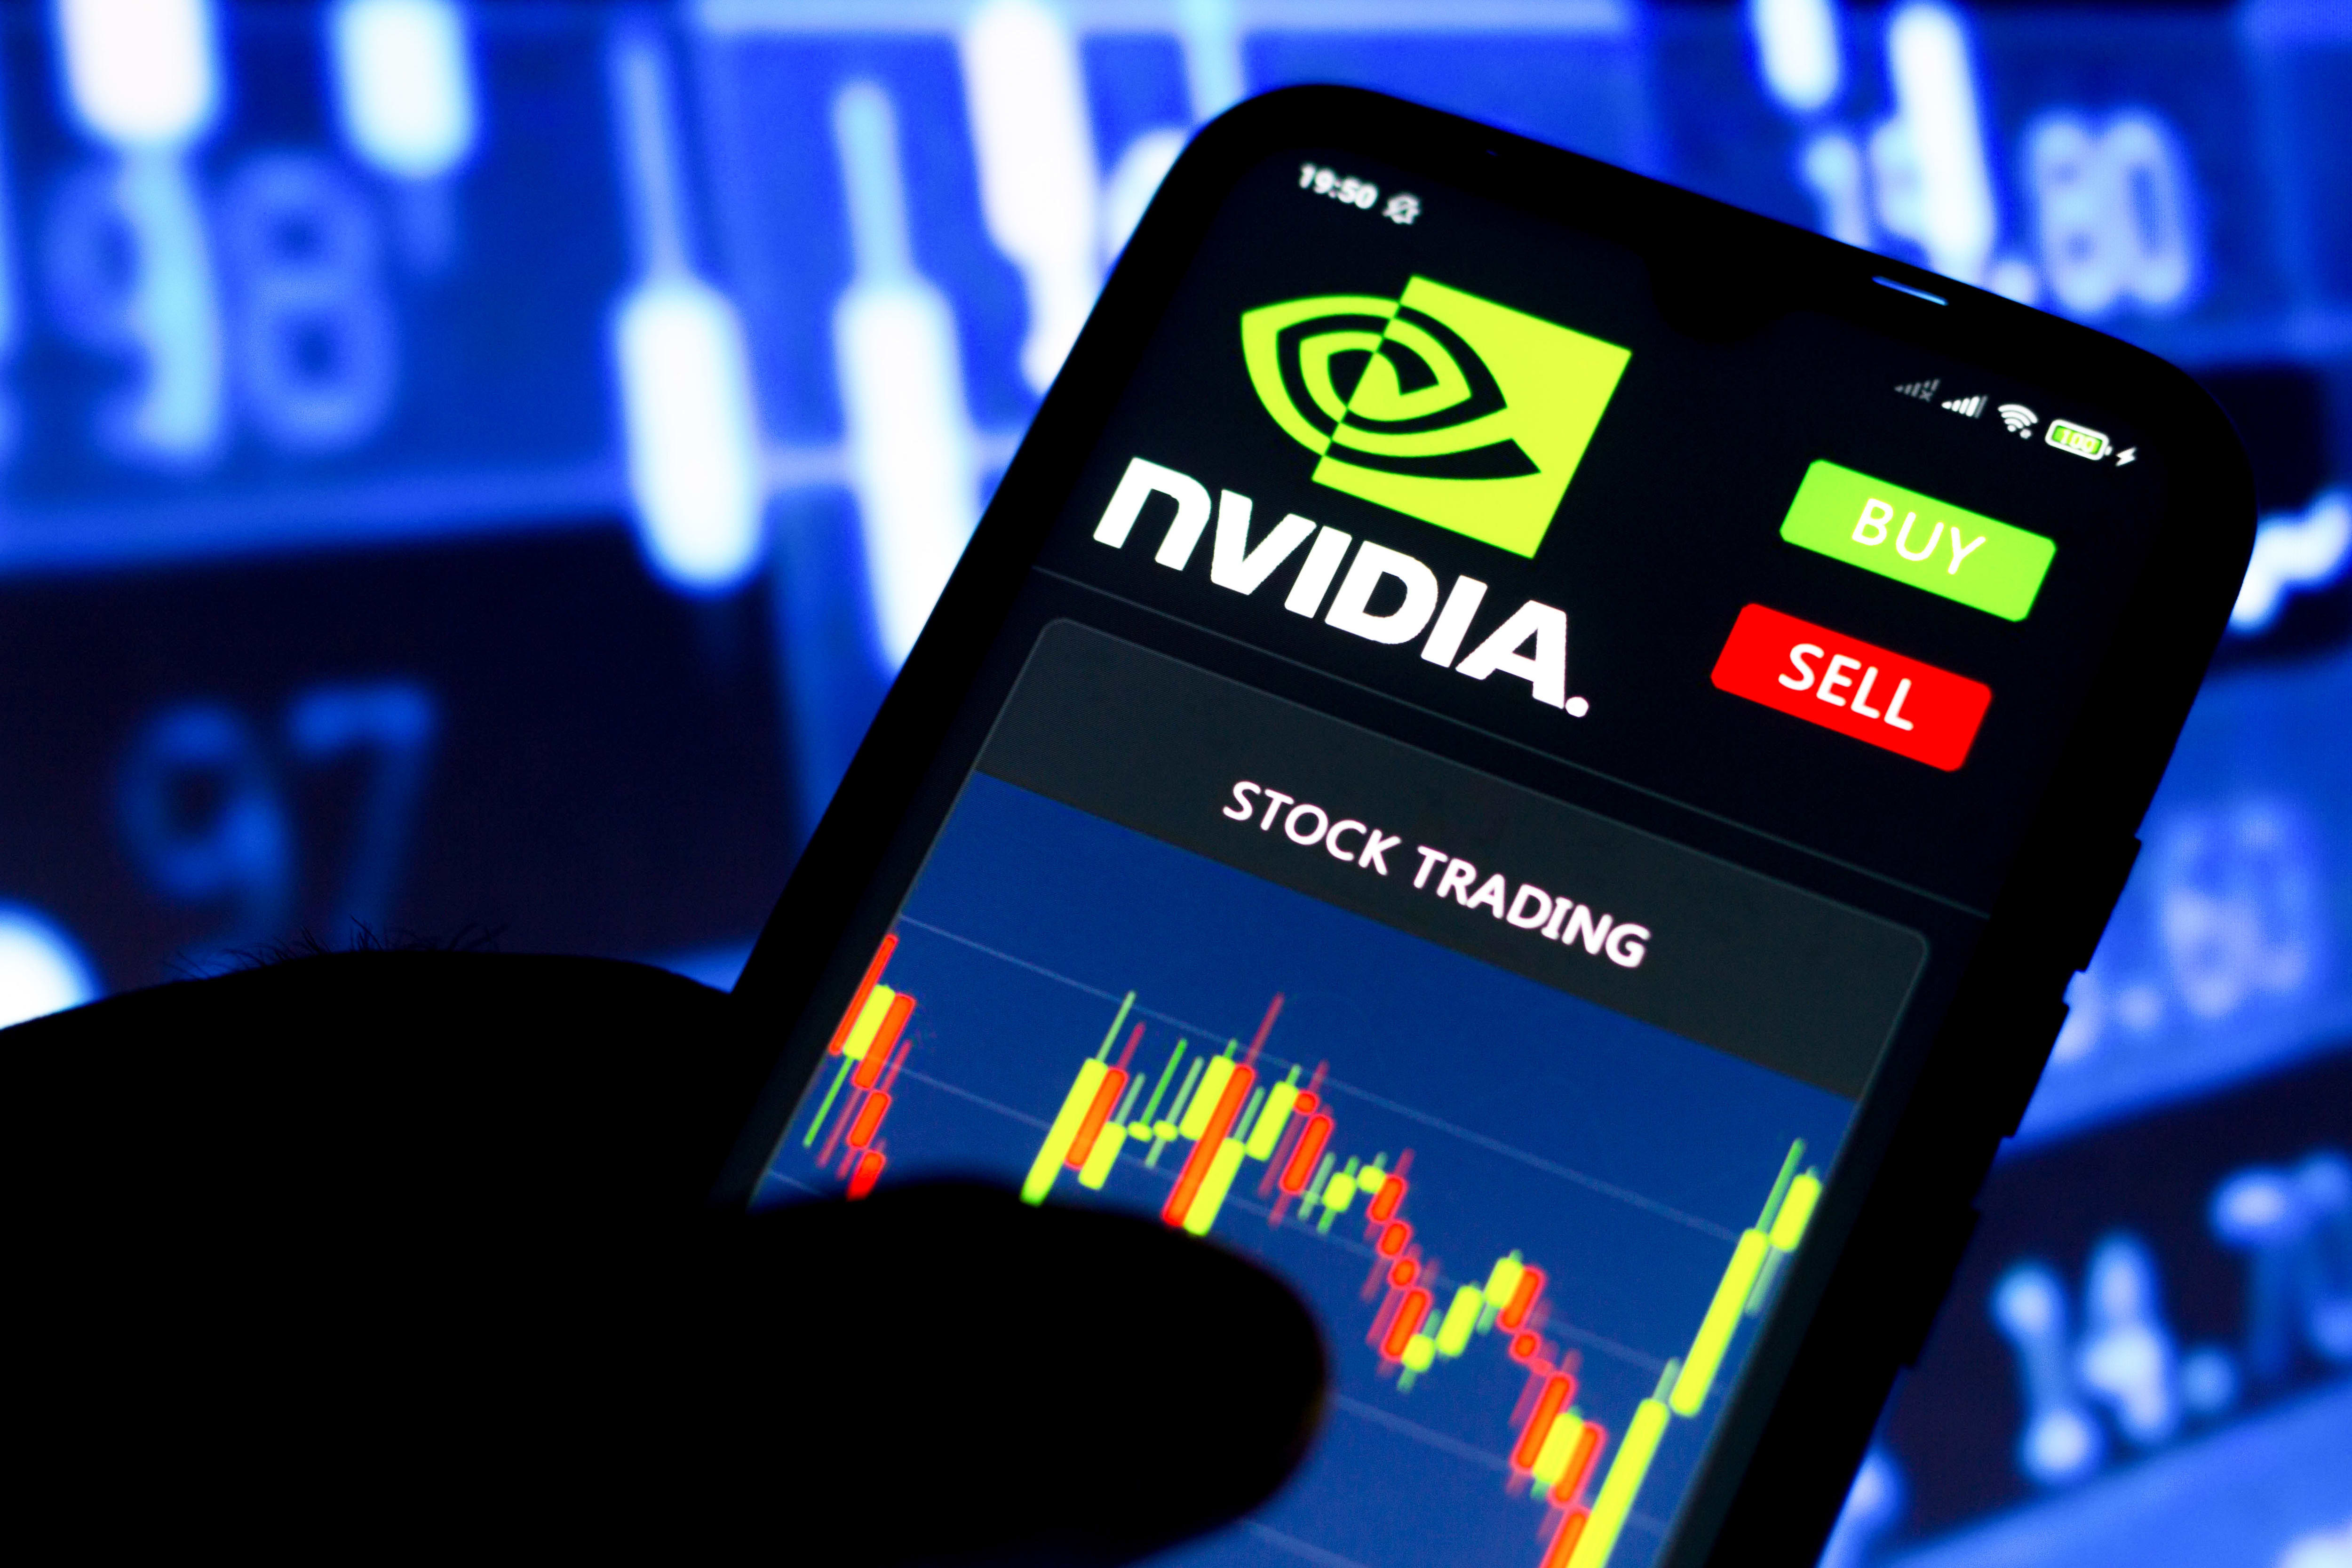 Analysts are falling back in love with Nvidia, with Citi giving it almost 100% upside